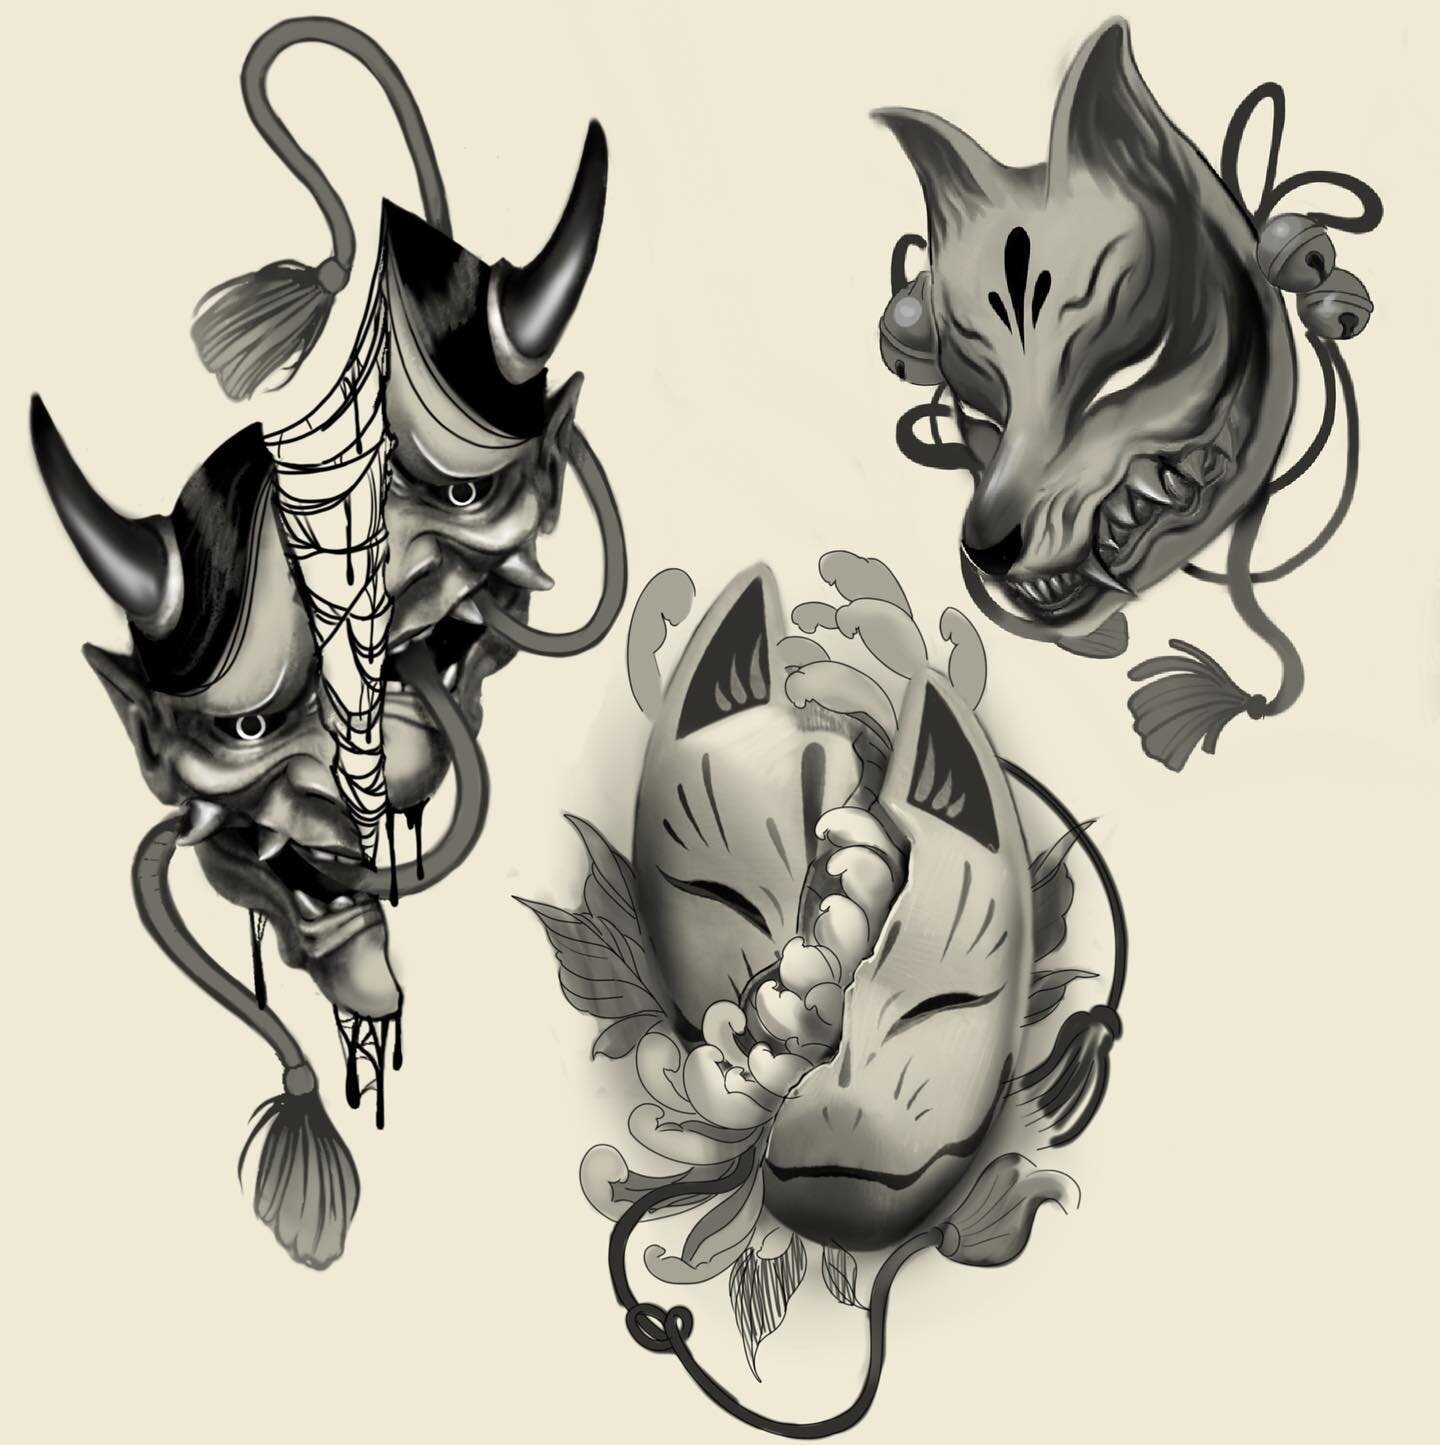 Fox and Hannya mask.
Small - medium flash!

I&rsquo;ve noticed there&rsquo;s a lack of information and some misunderstanding in the west about hannya despite it being a popular subject in tattoos, so I wanna look into it to explain more in depth. May